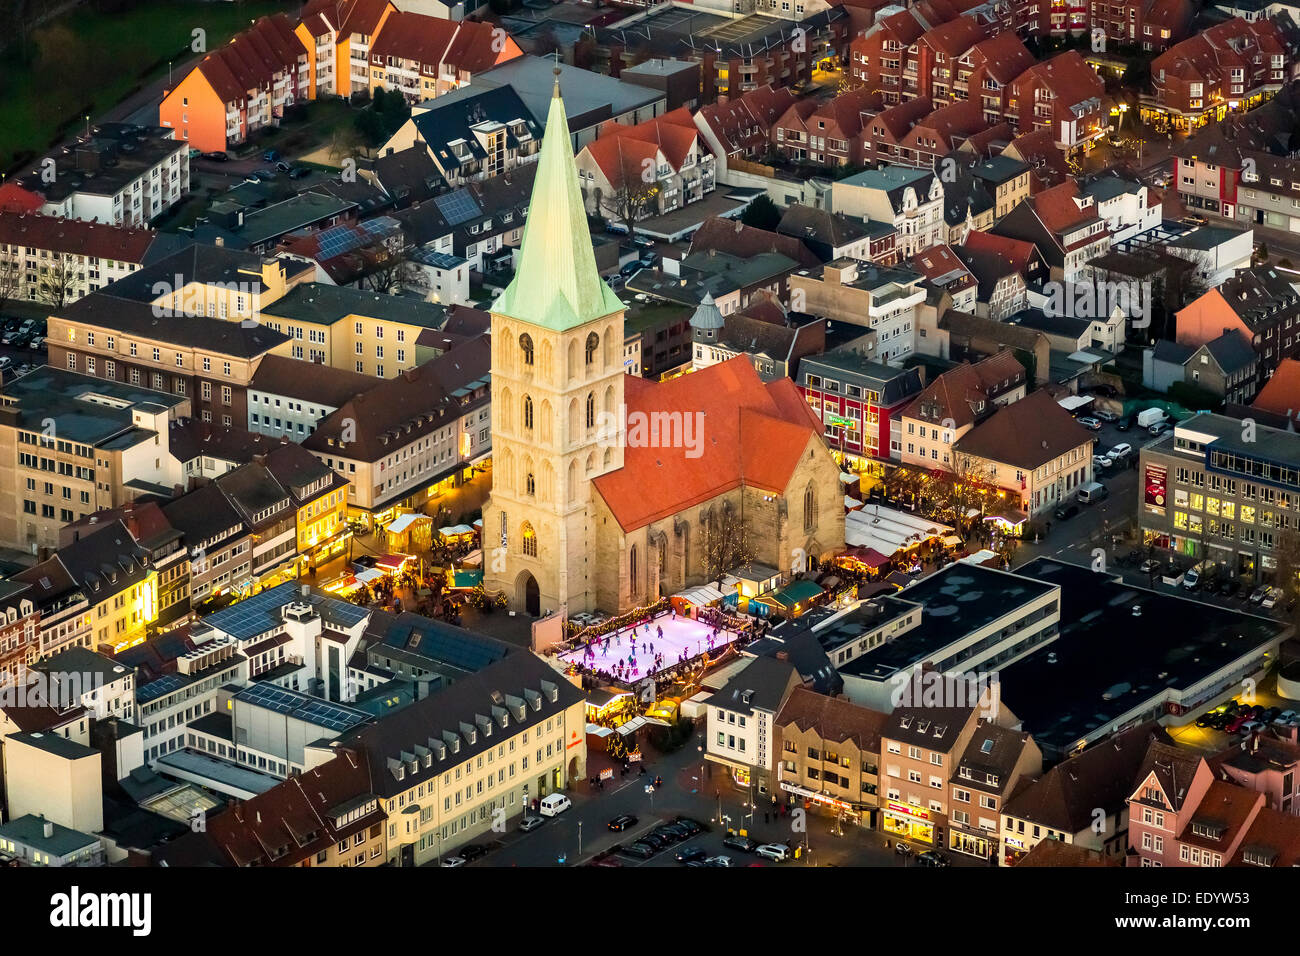 Aerial View, St. Paul's Church with Christmas market, ice rink, downtown, Hamm, Ruhr district, North Rhine-Westphalia, Germany Stock Photo